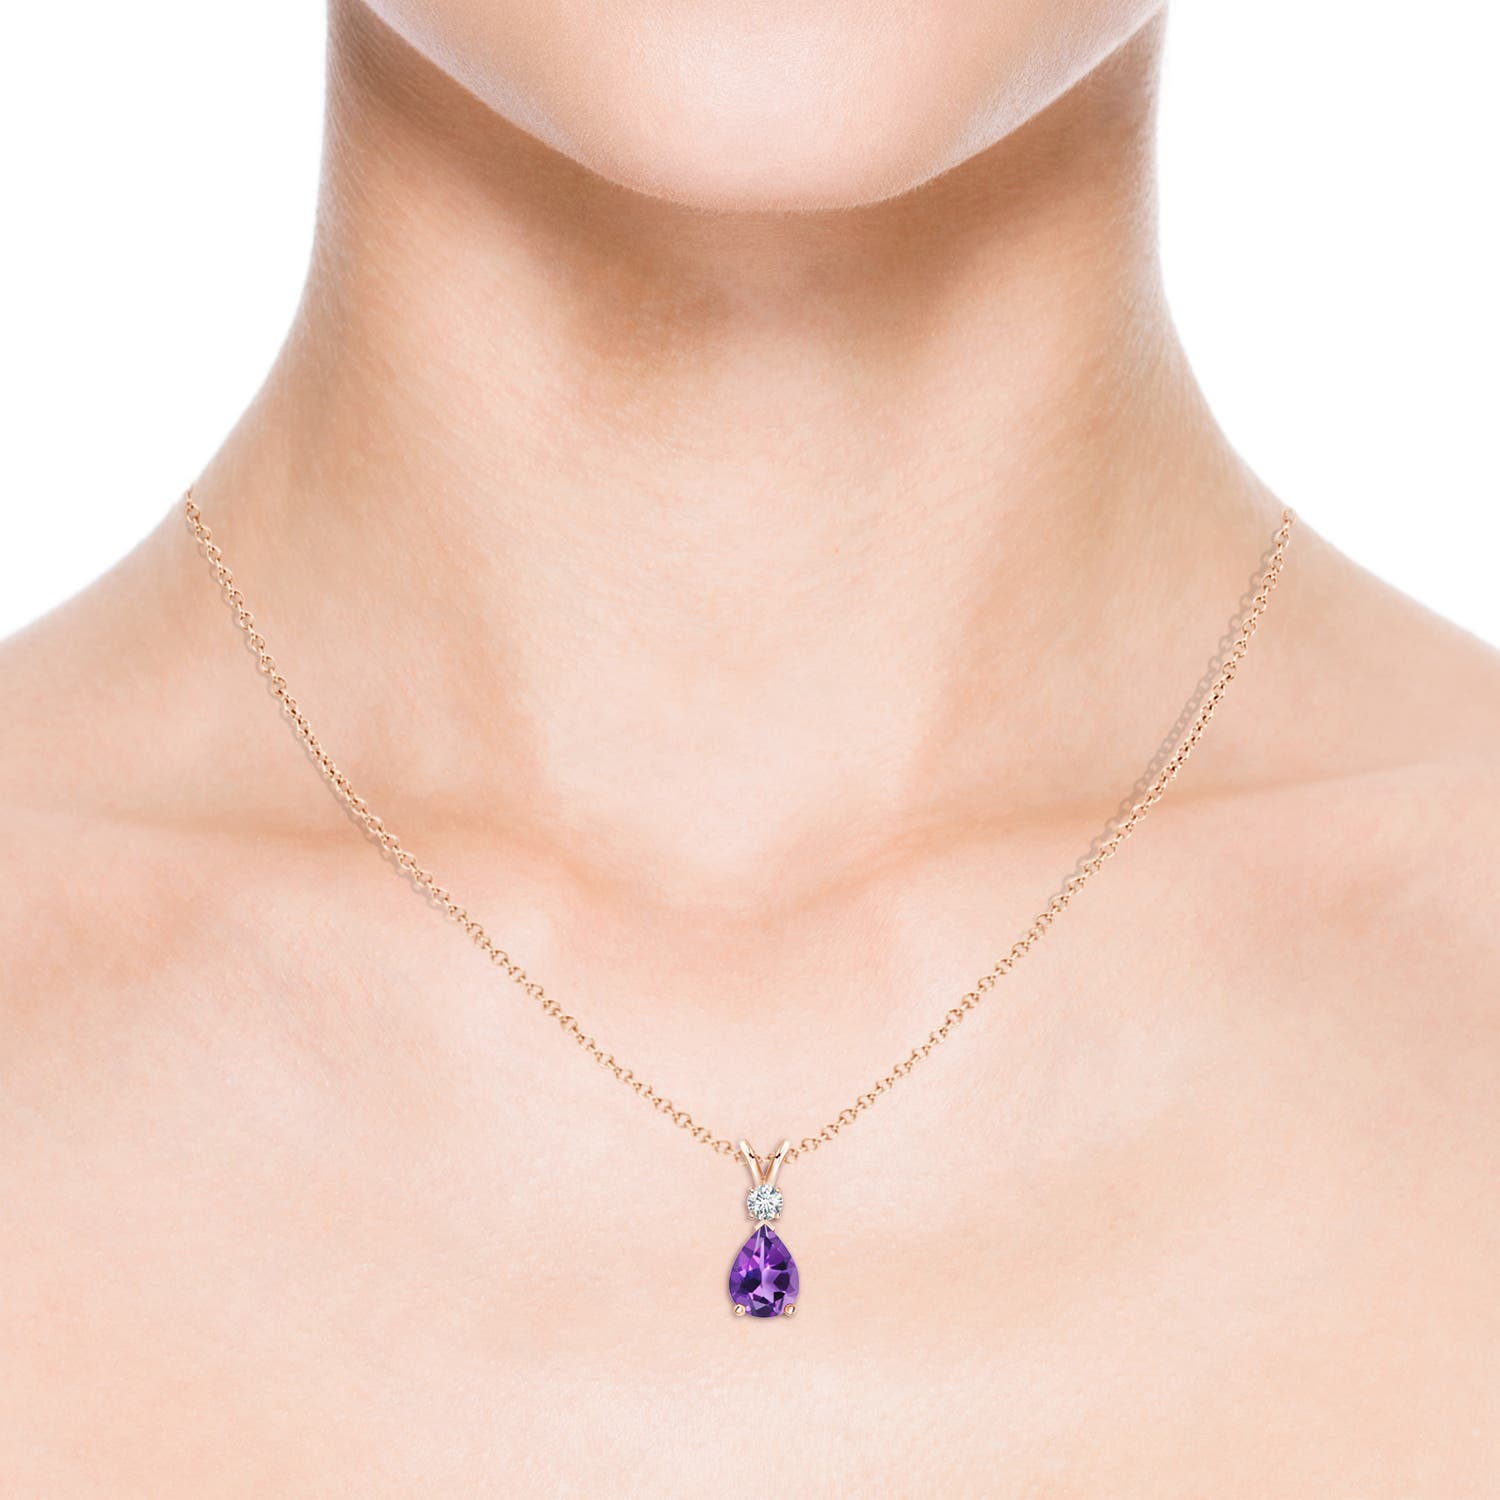 AAA - Amethyst / 1.11 CT / 14 KT Rose Gold